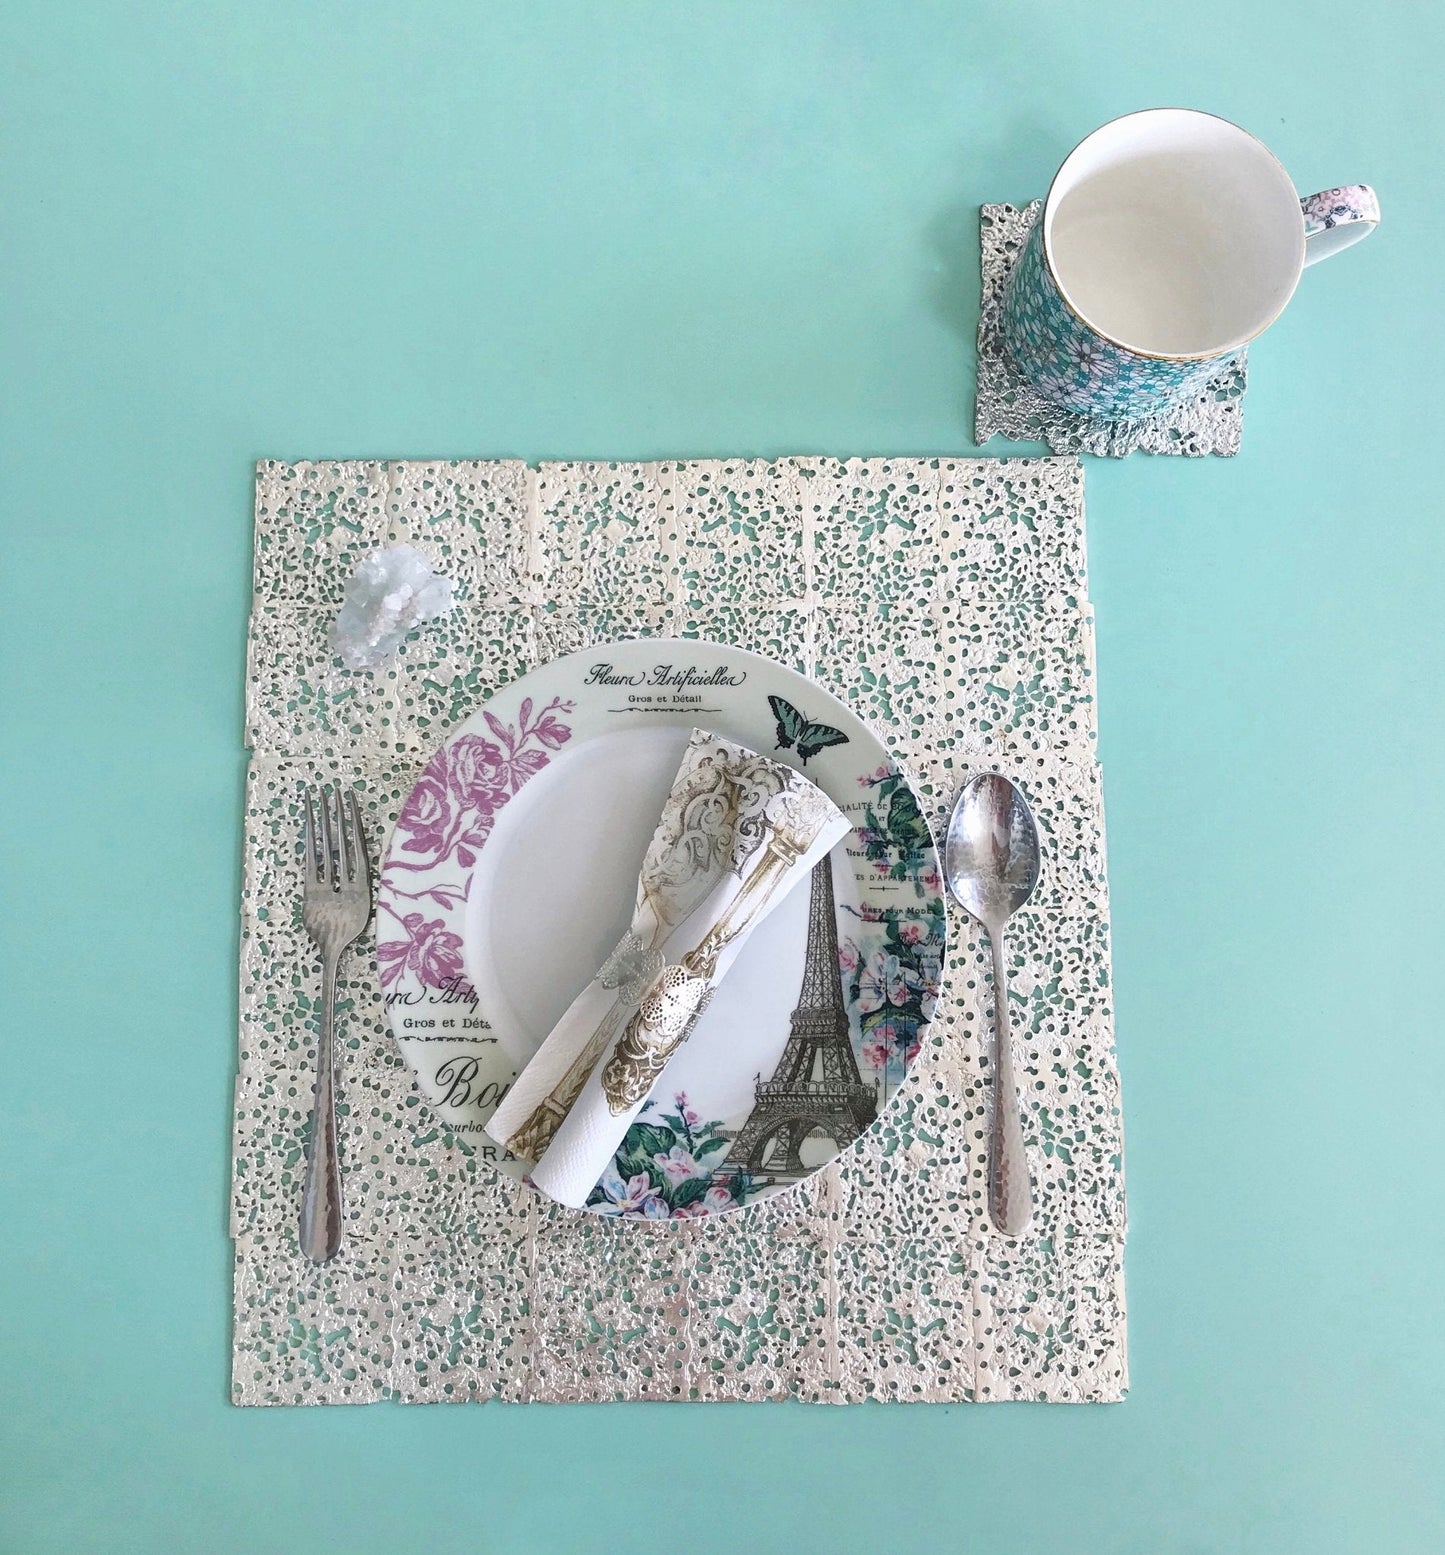 Cast Lace Placemat Charger - Ariana Ost